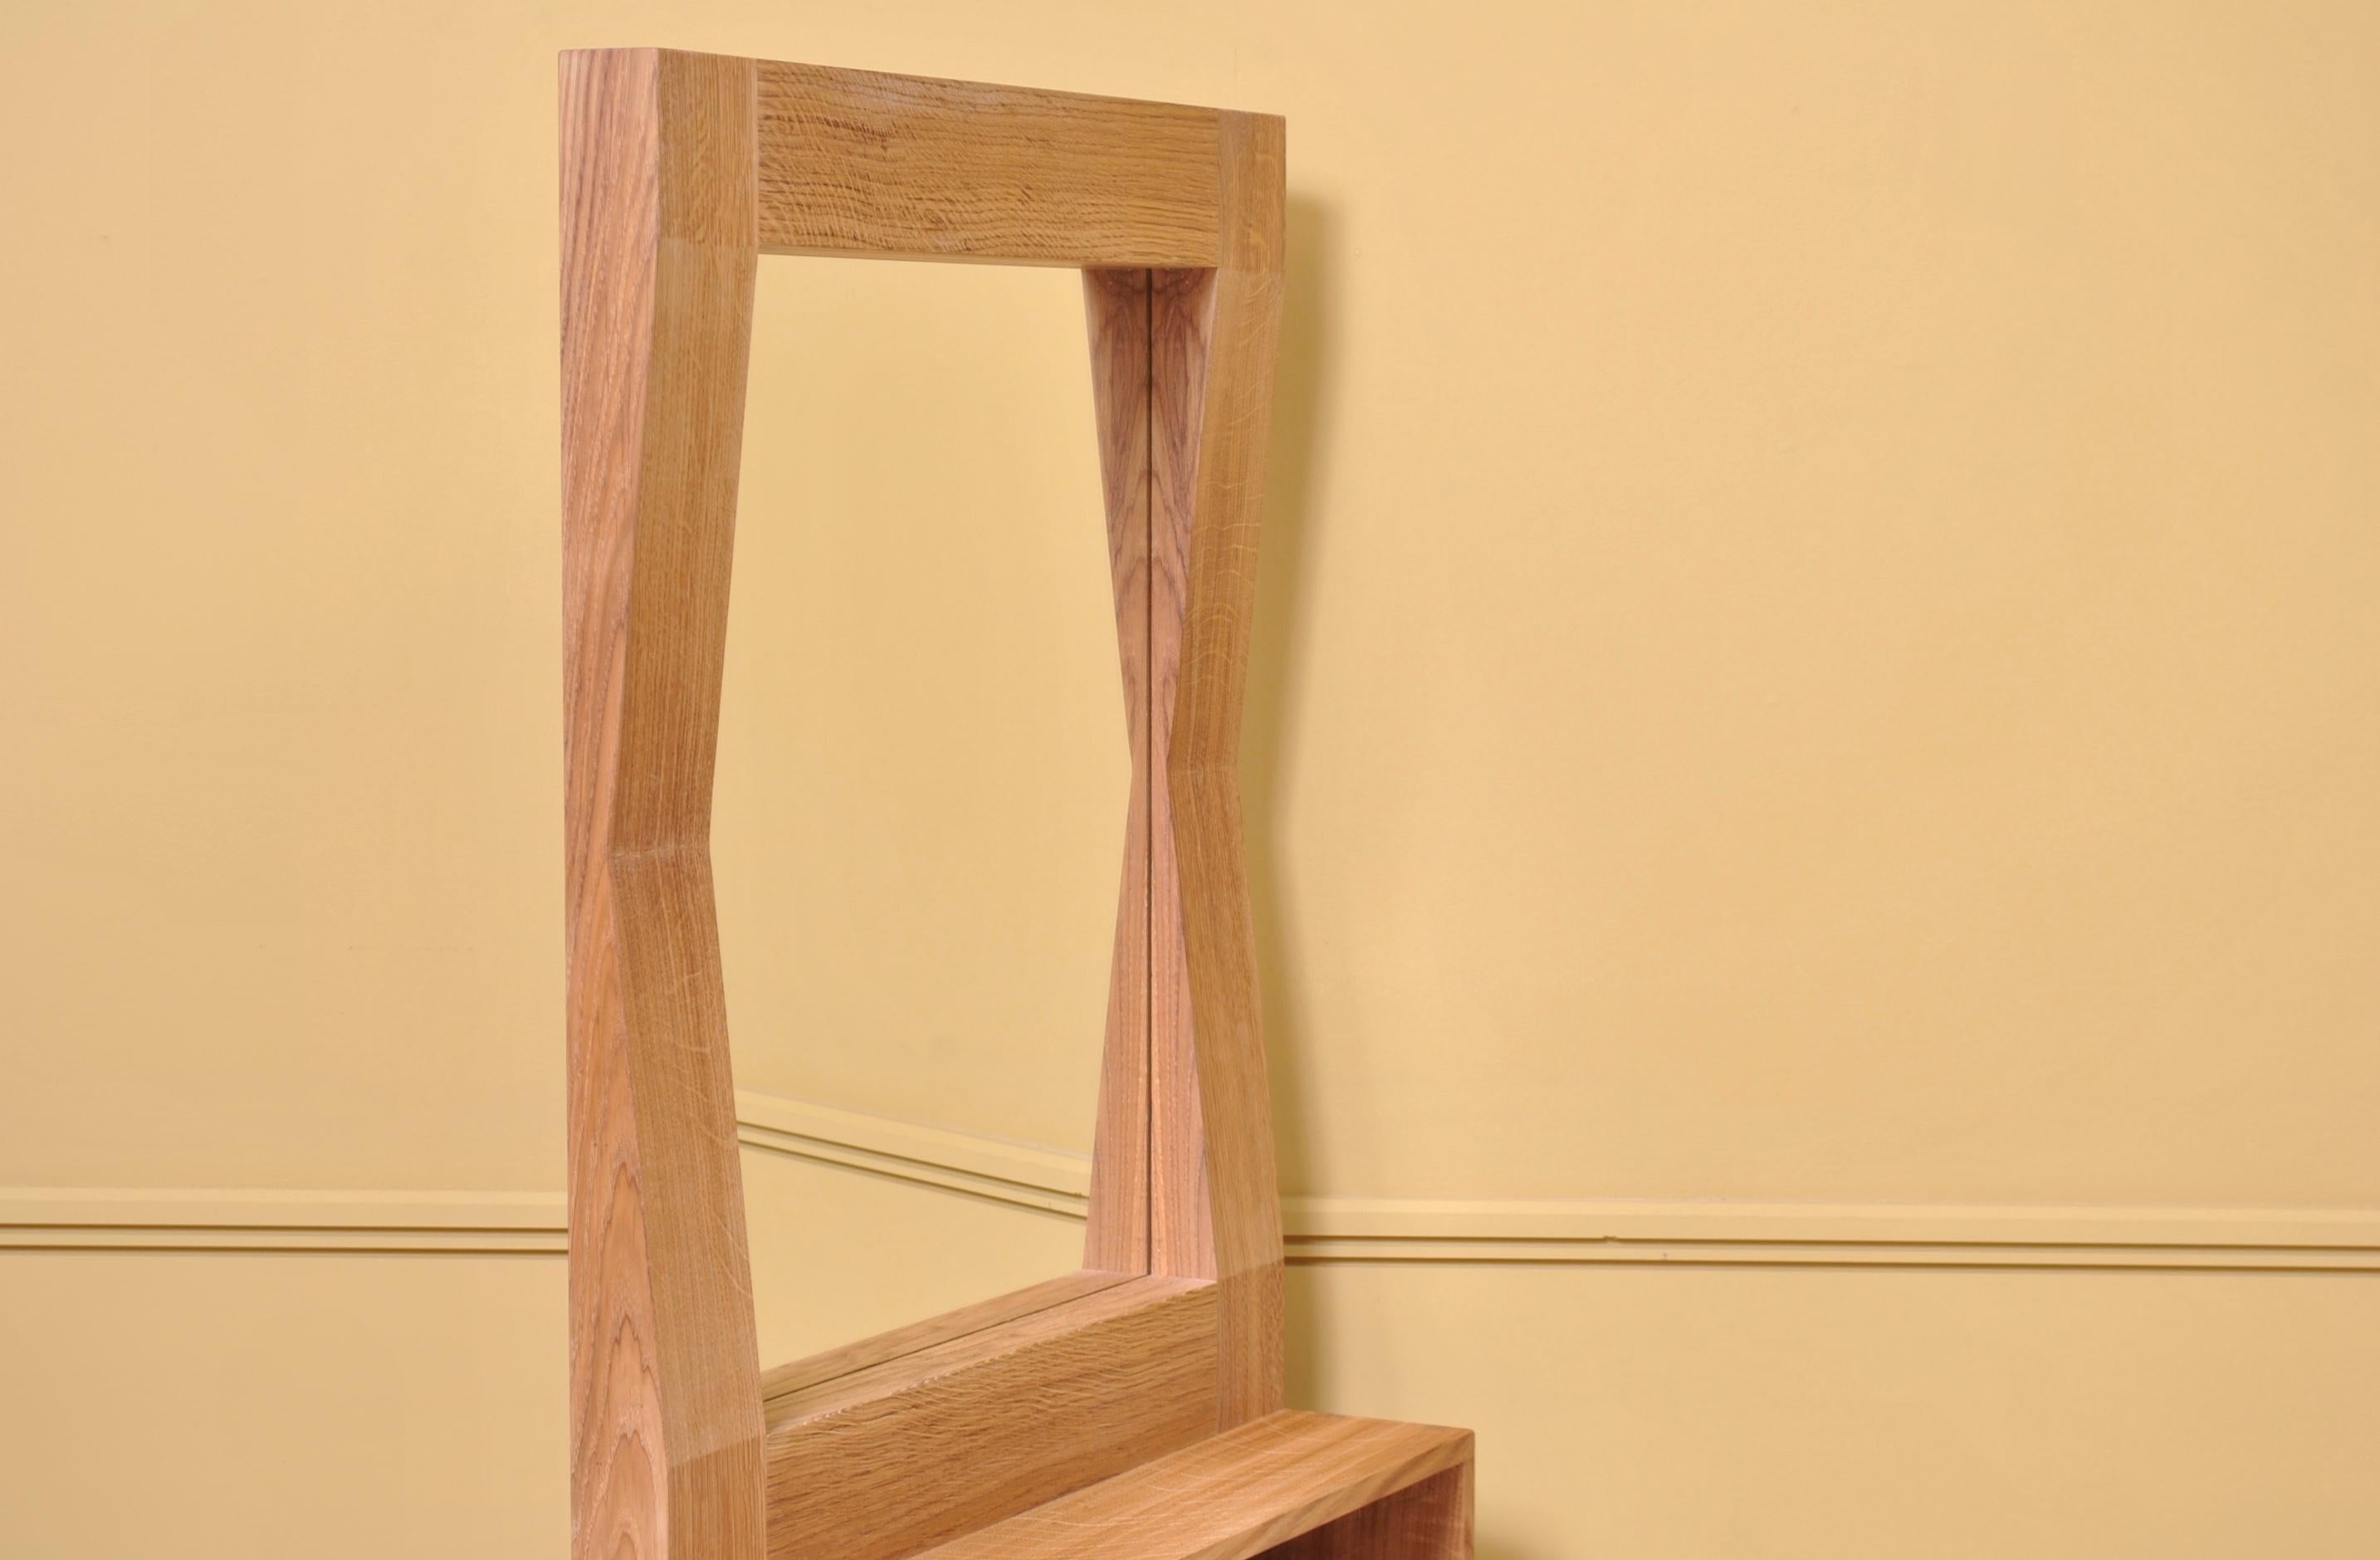 Hand-Crafted Large Handcrafted Oak Furrow Shelf Mirror